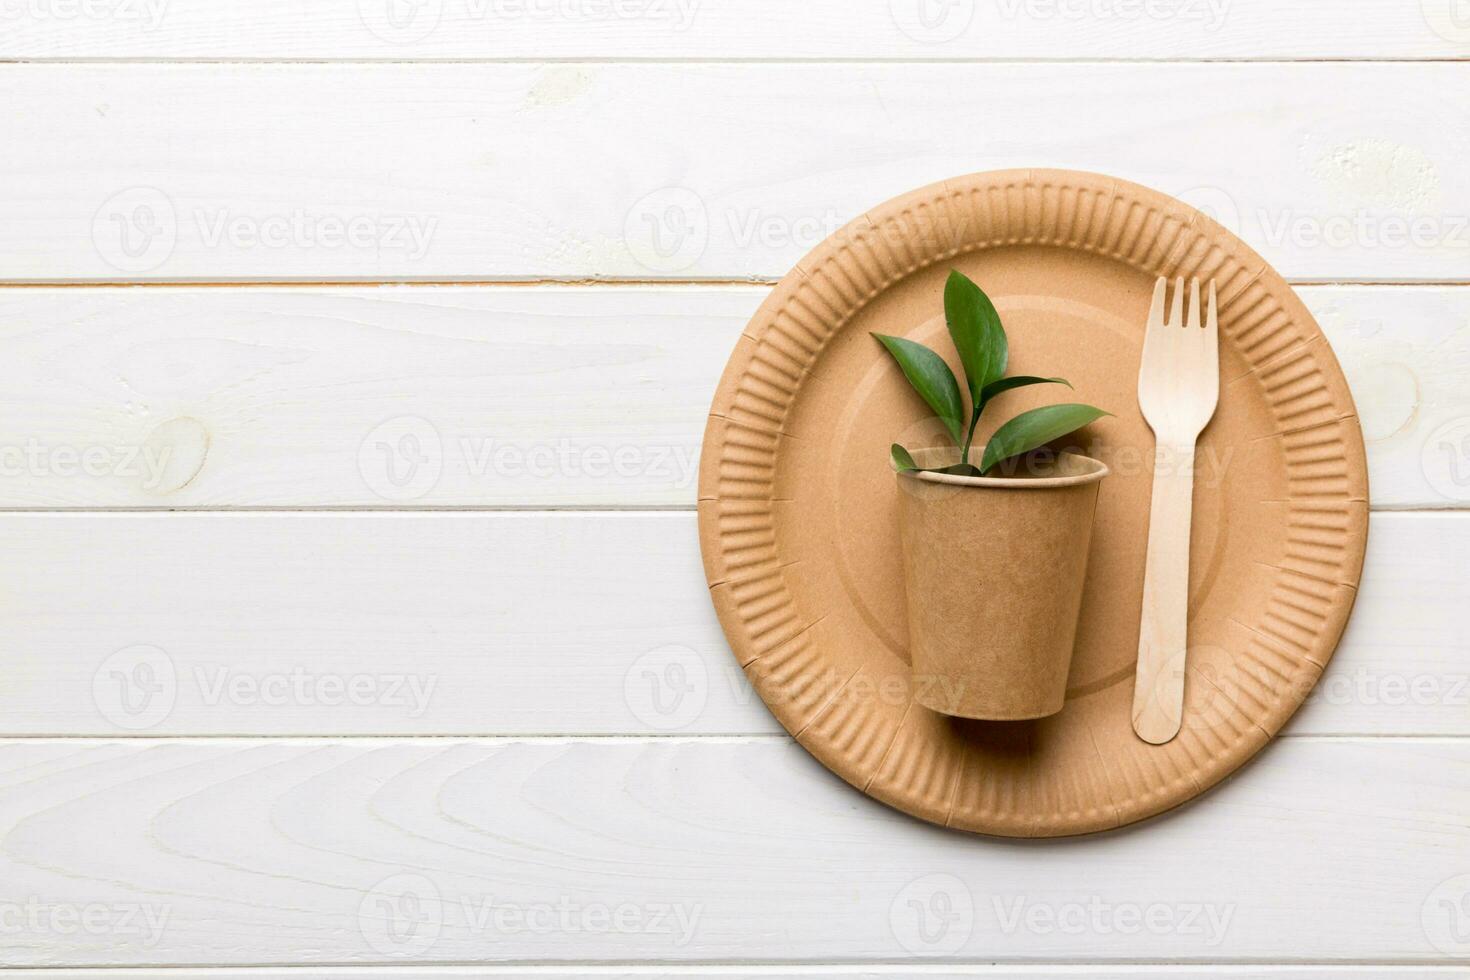 set of empty reusable disposable eco-friendly plates, cups, utensils on light white colored table background. top view. Biodegradable craft dishes. Recycling concept. Close-up photo